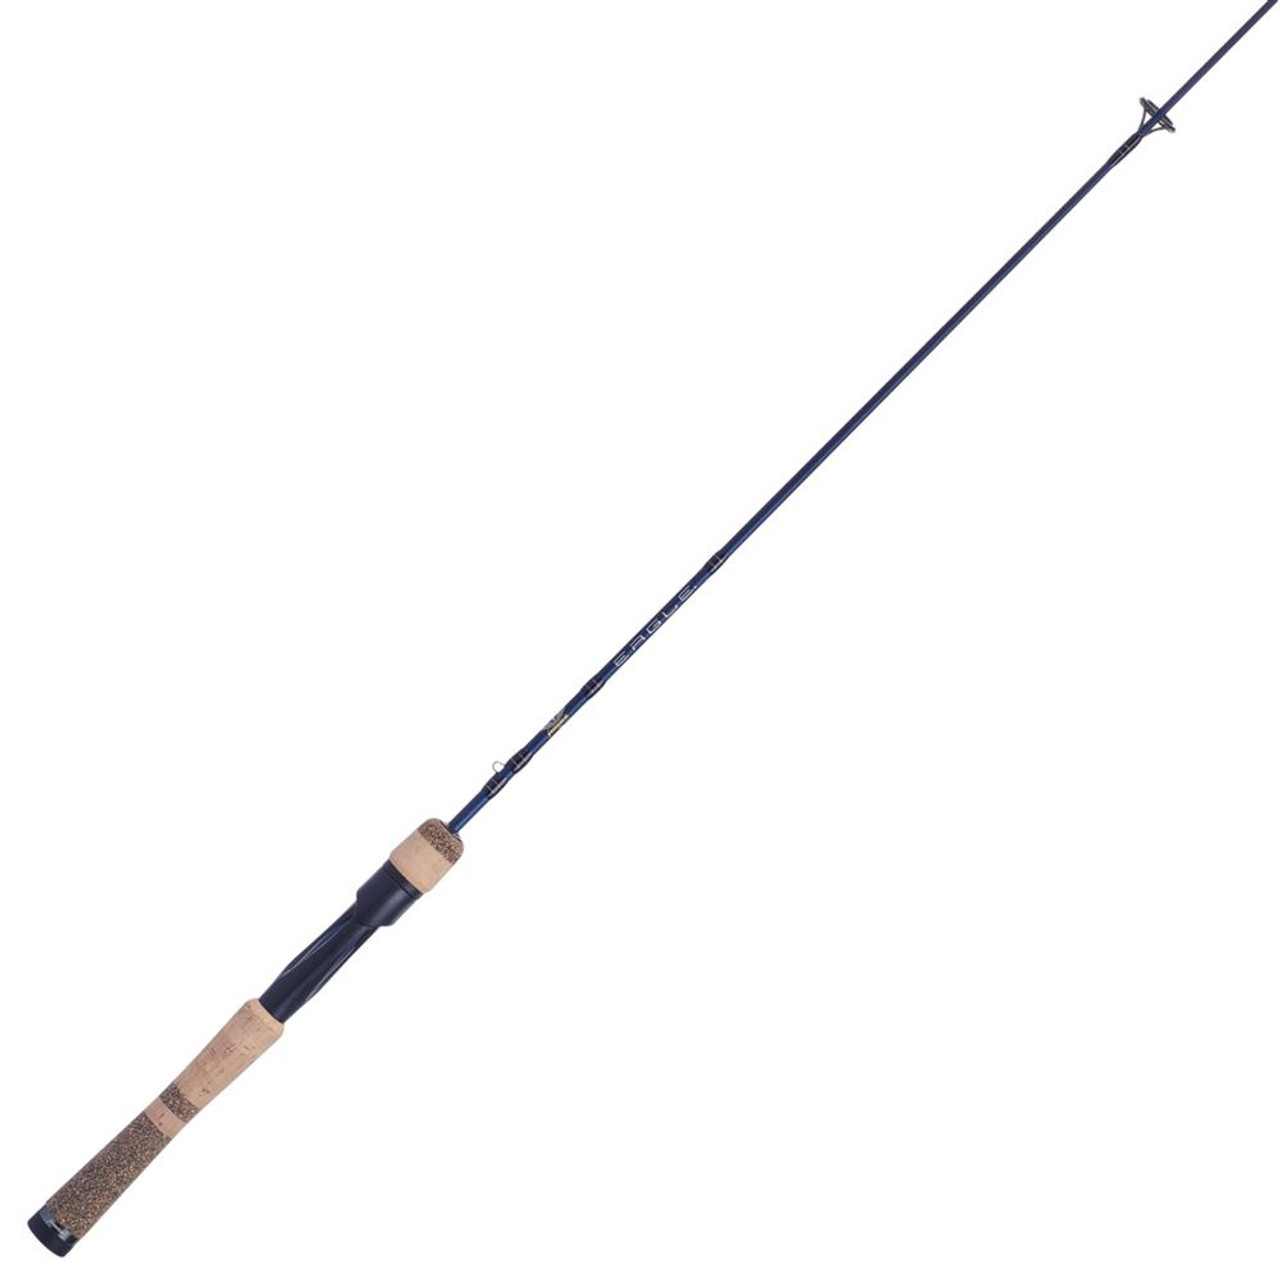 Fenwick Eagle Spinning Rods - Yeager's Sporting Goods